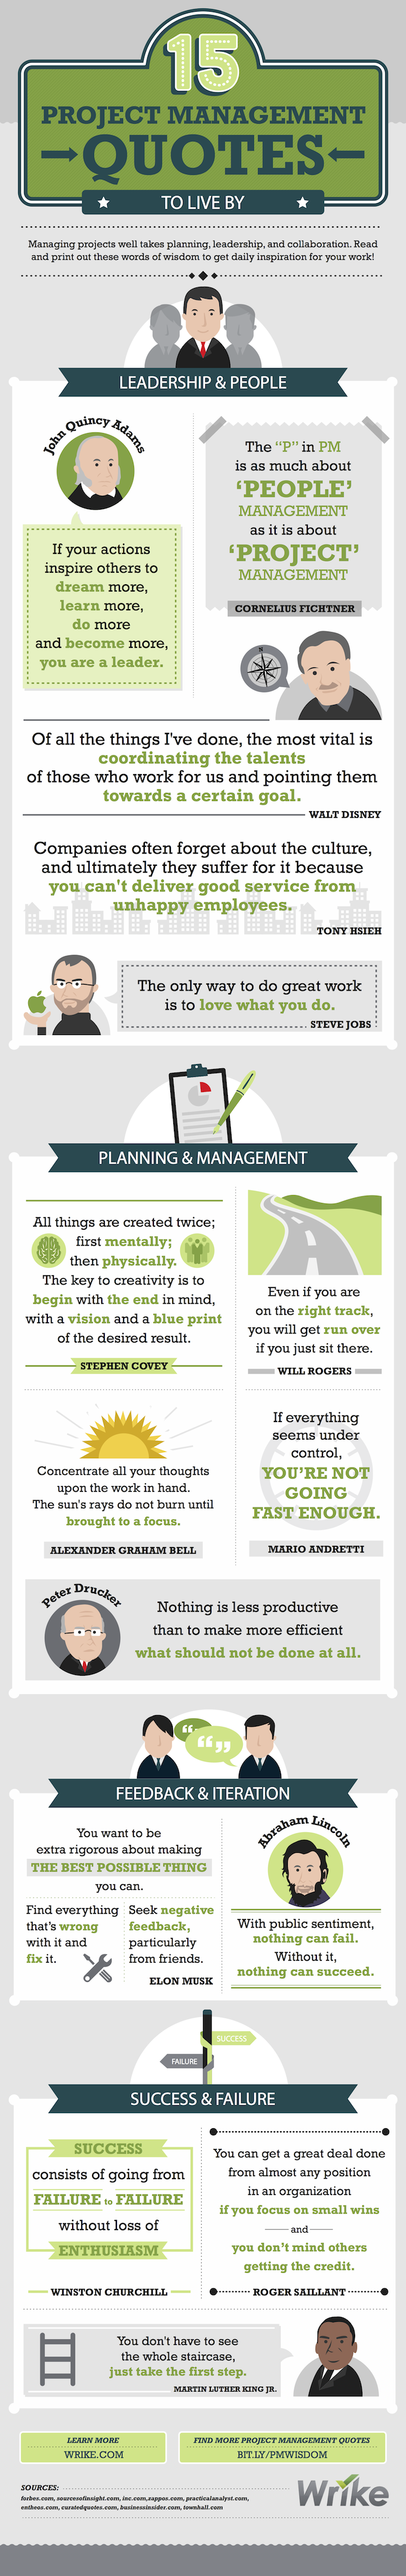 15 inspirational Project Management quotes to live by #infographic